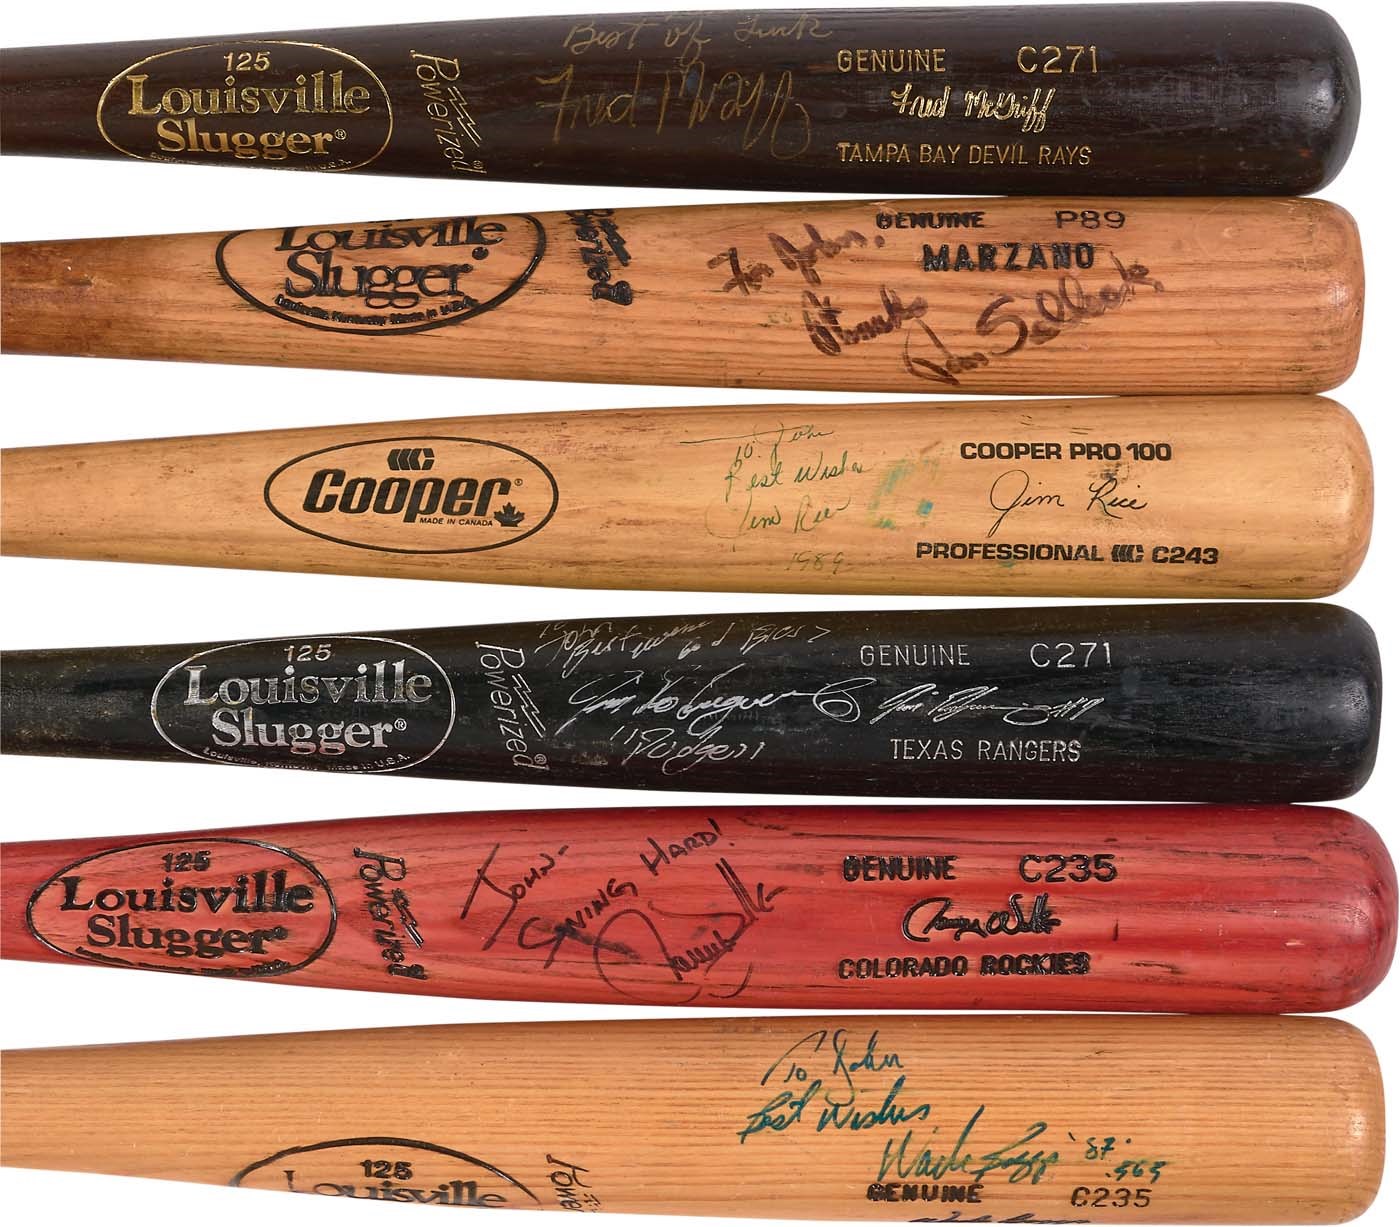 The 1984 USA Baseball Olympian Collection - Personally Gifted Game Used & Signed Bat Collection to 1984 USA Baseball Olympian (20+)